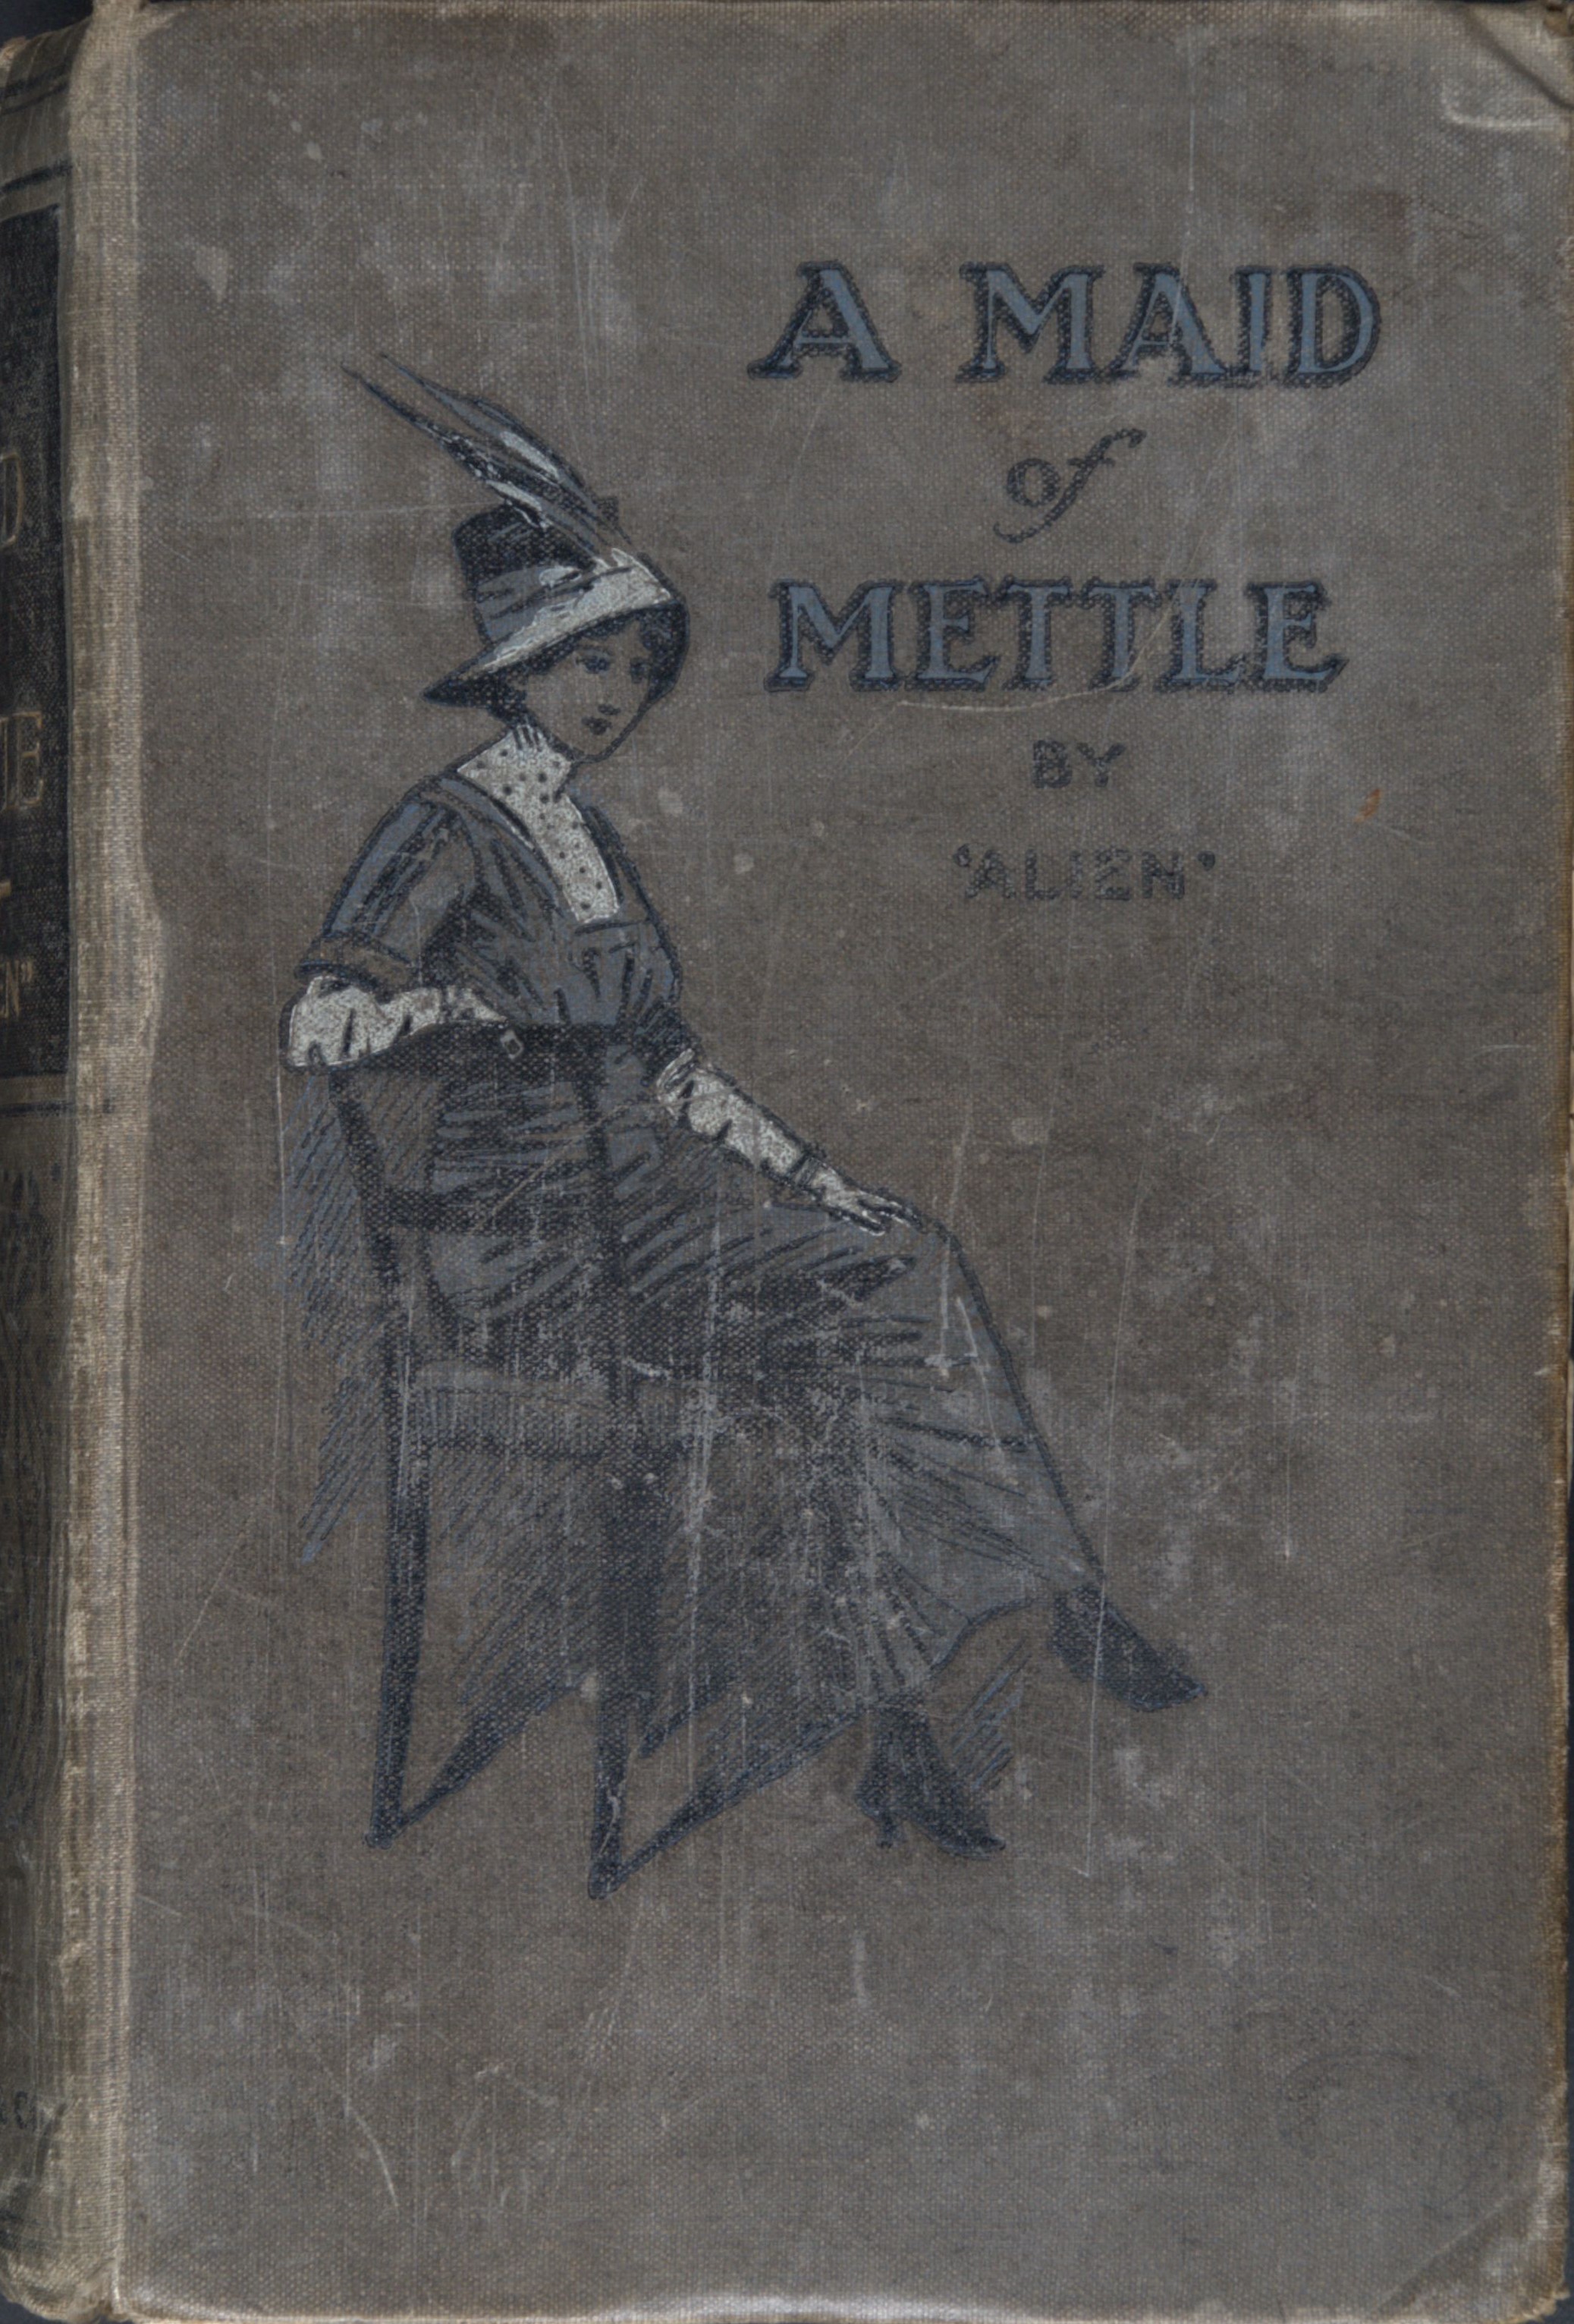 Maid of mettle